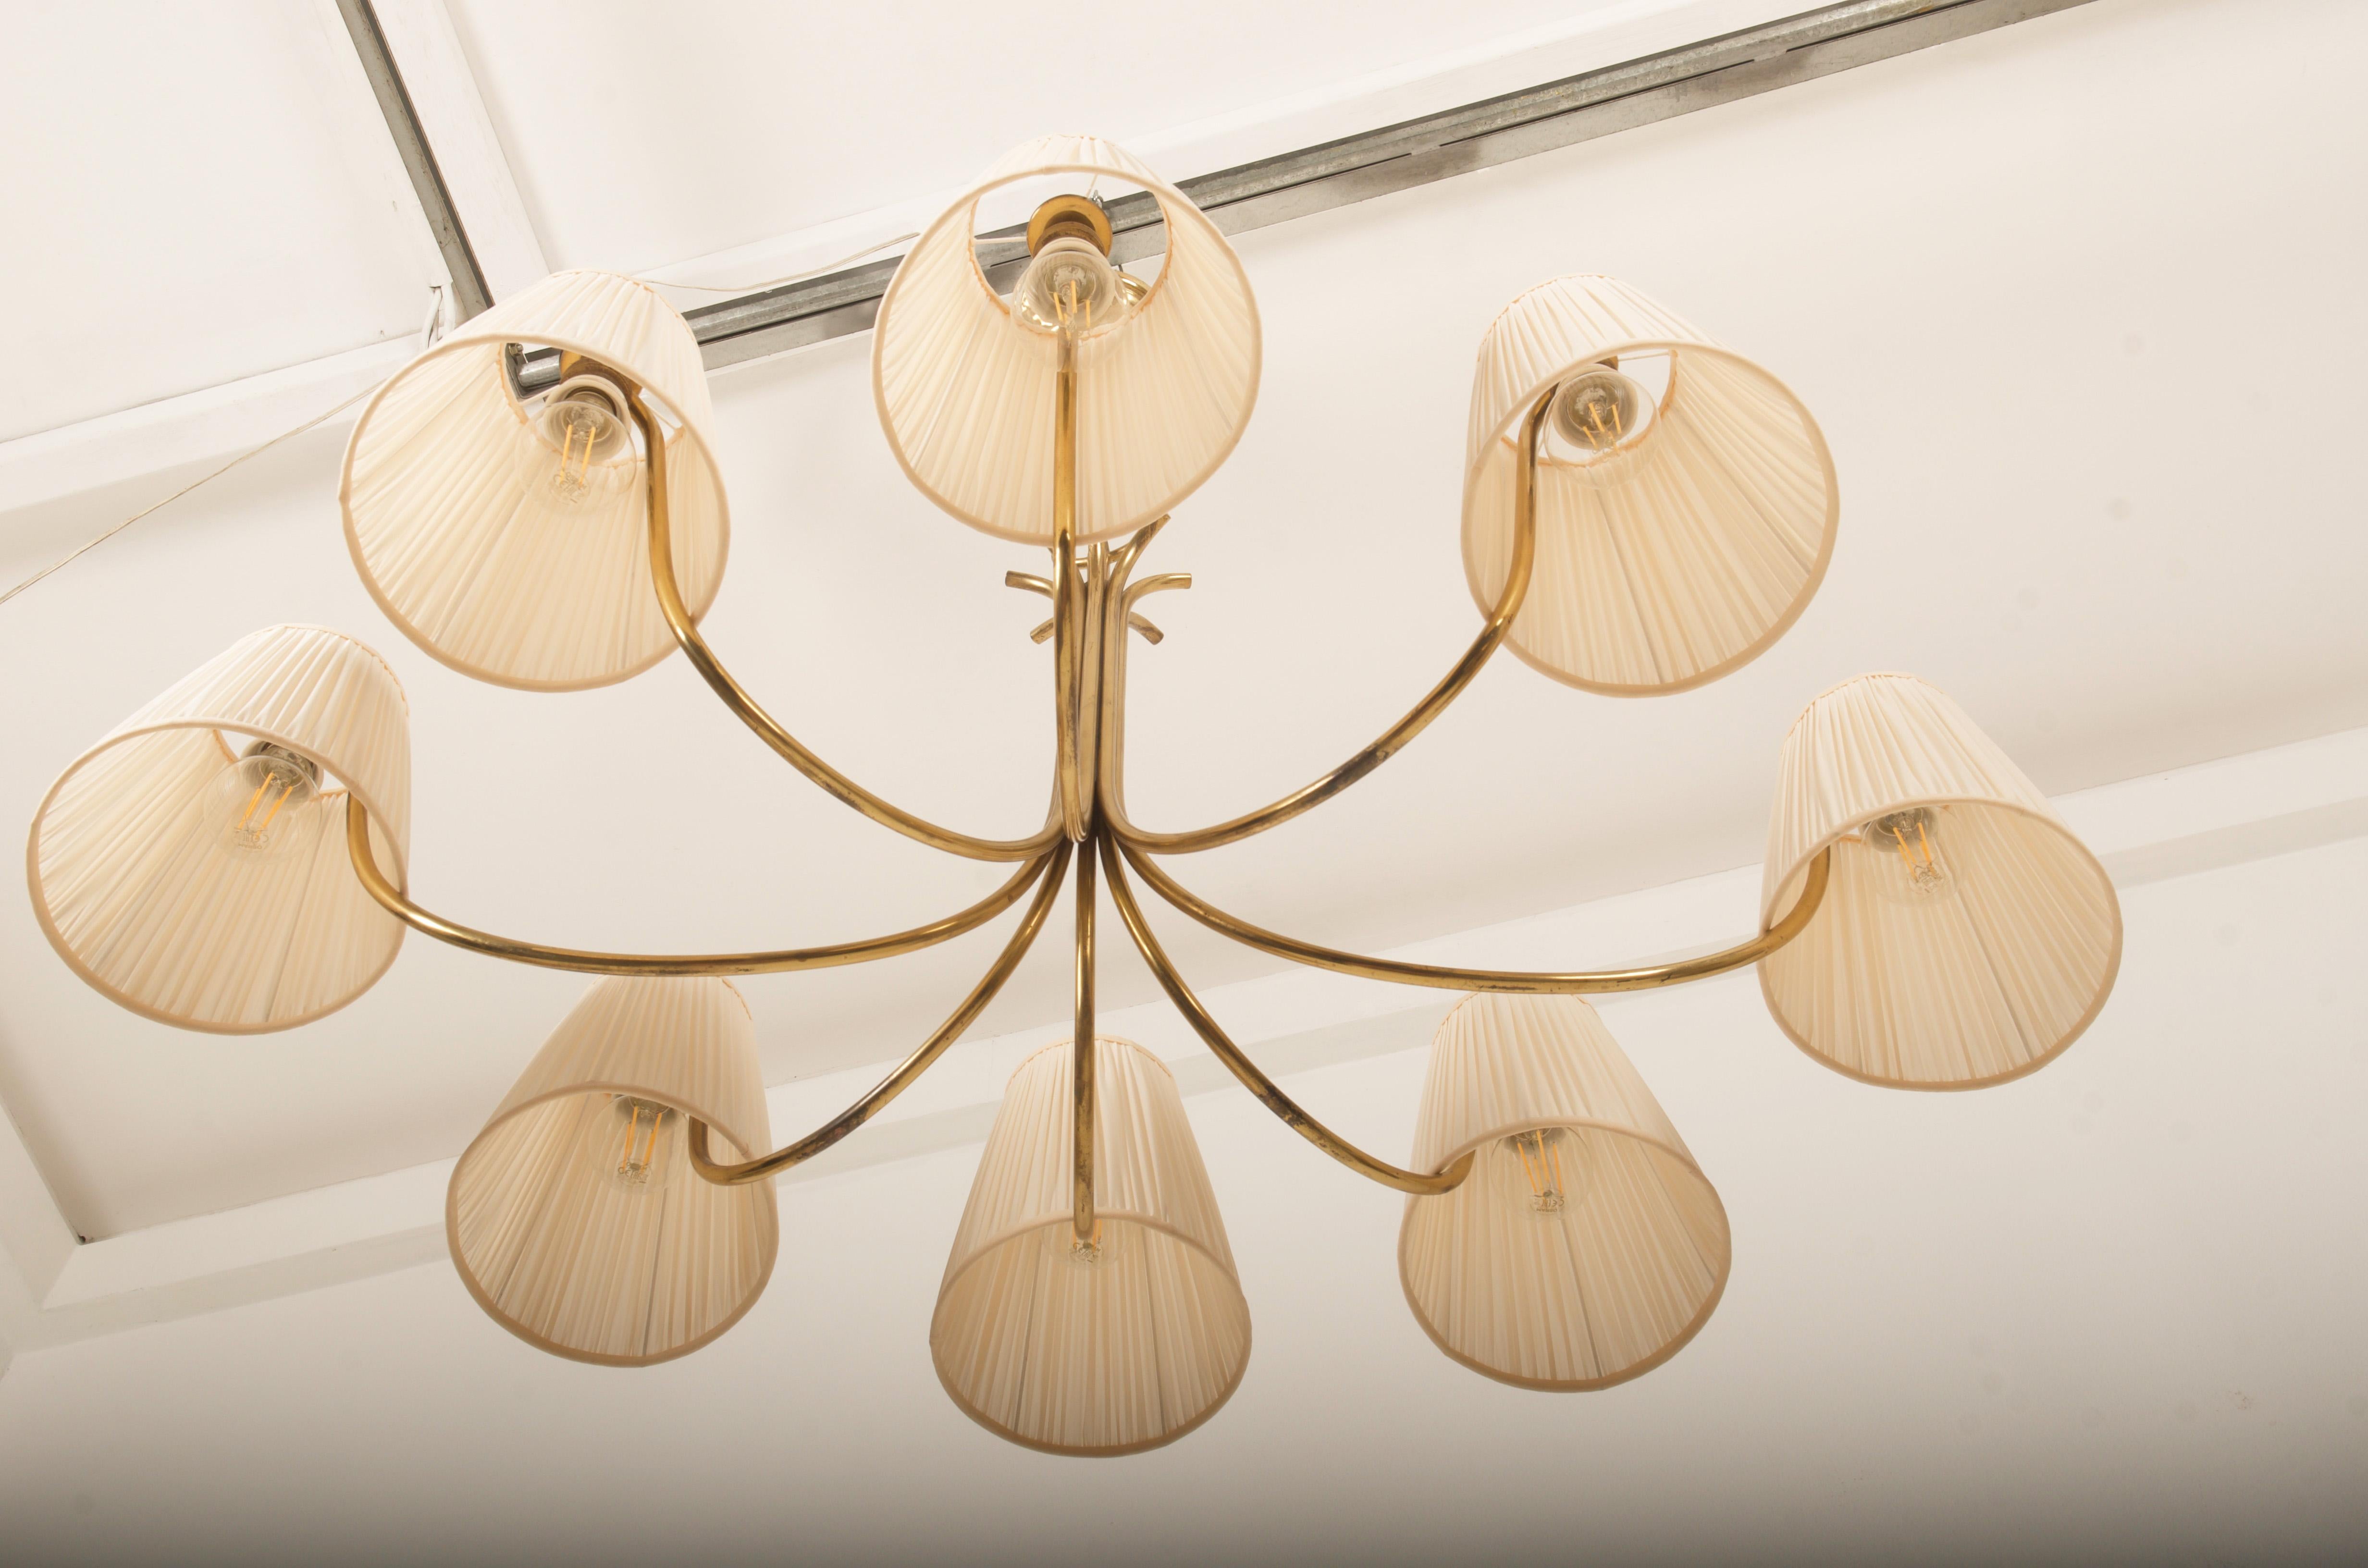 Rare Eight Arms Chandelier by Josef Frank for Kalmar For Sale 5